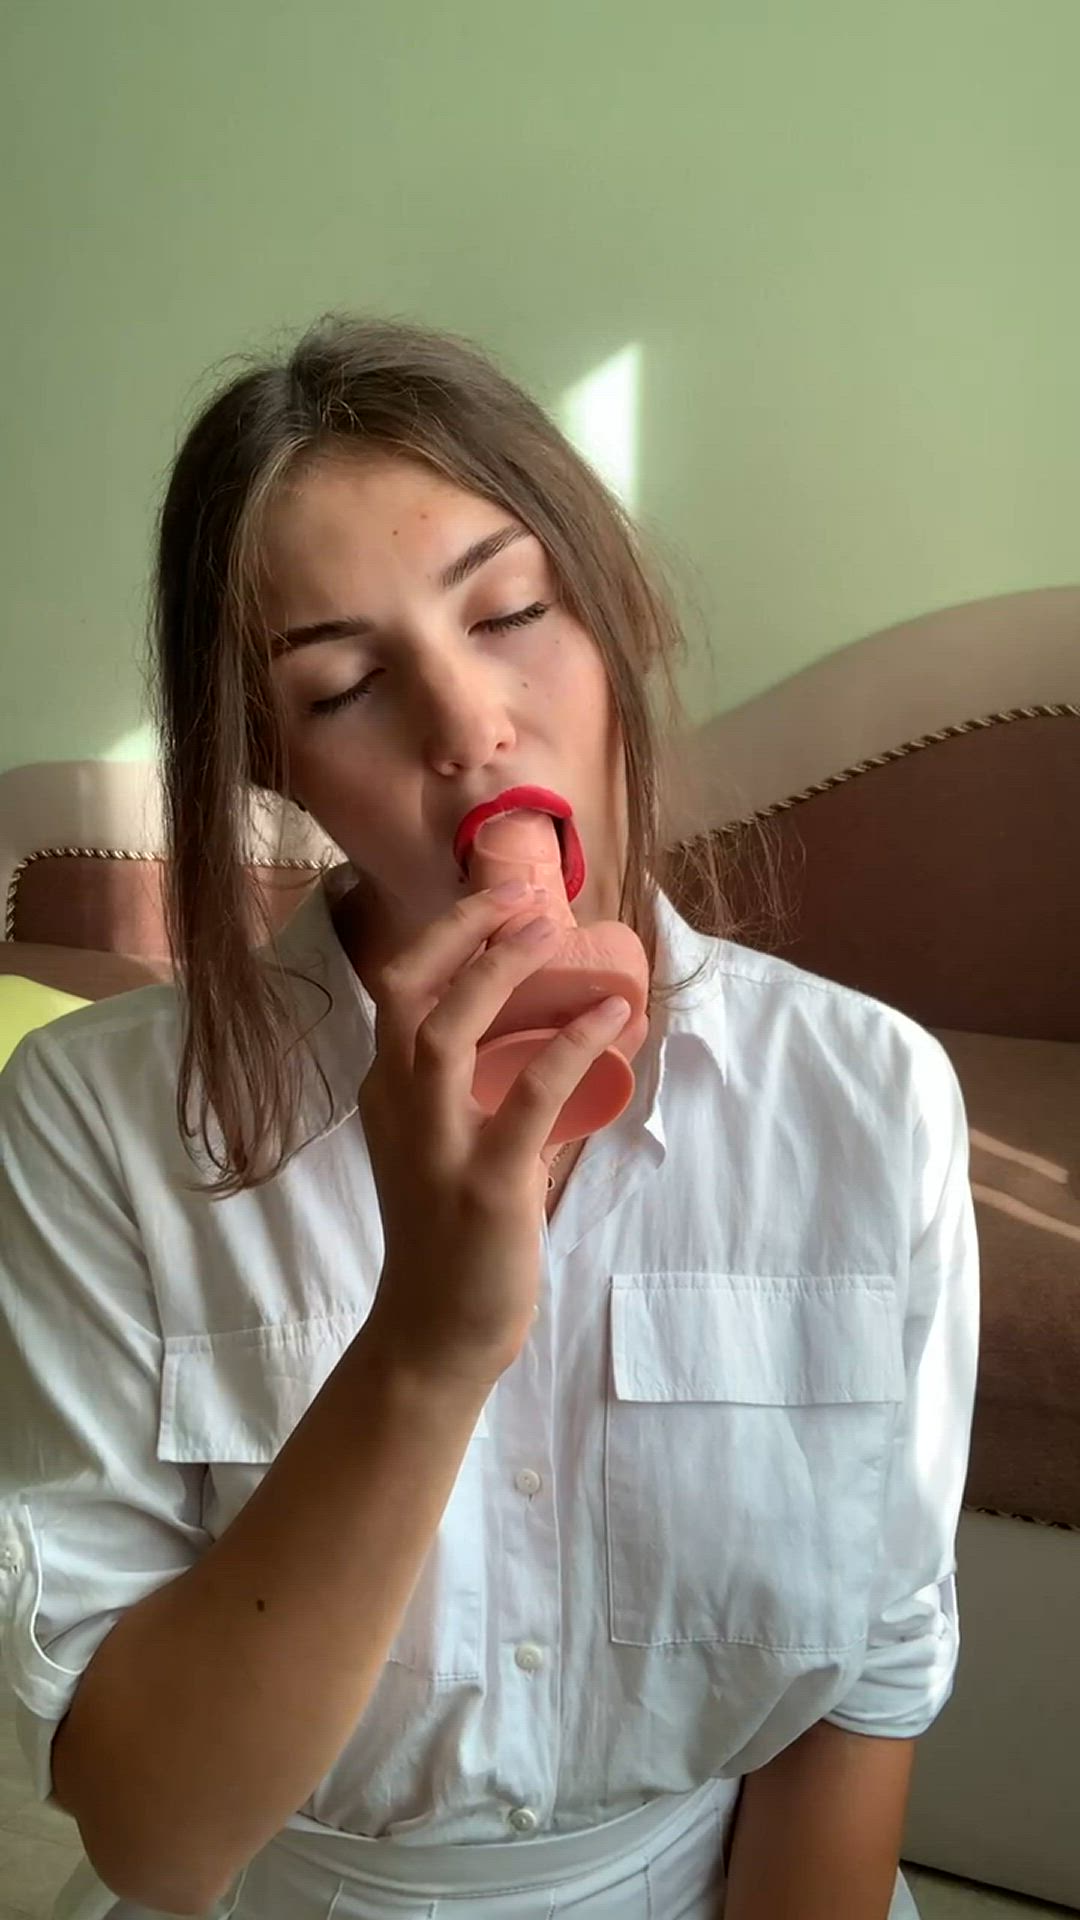 Blowjob porn video with onlyfans model mermaidbest <strong>@action</strong>